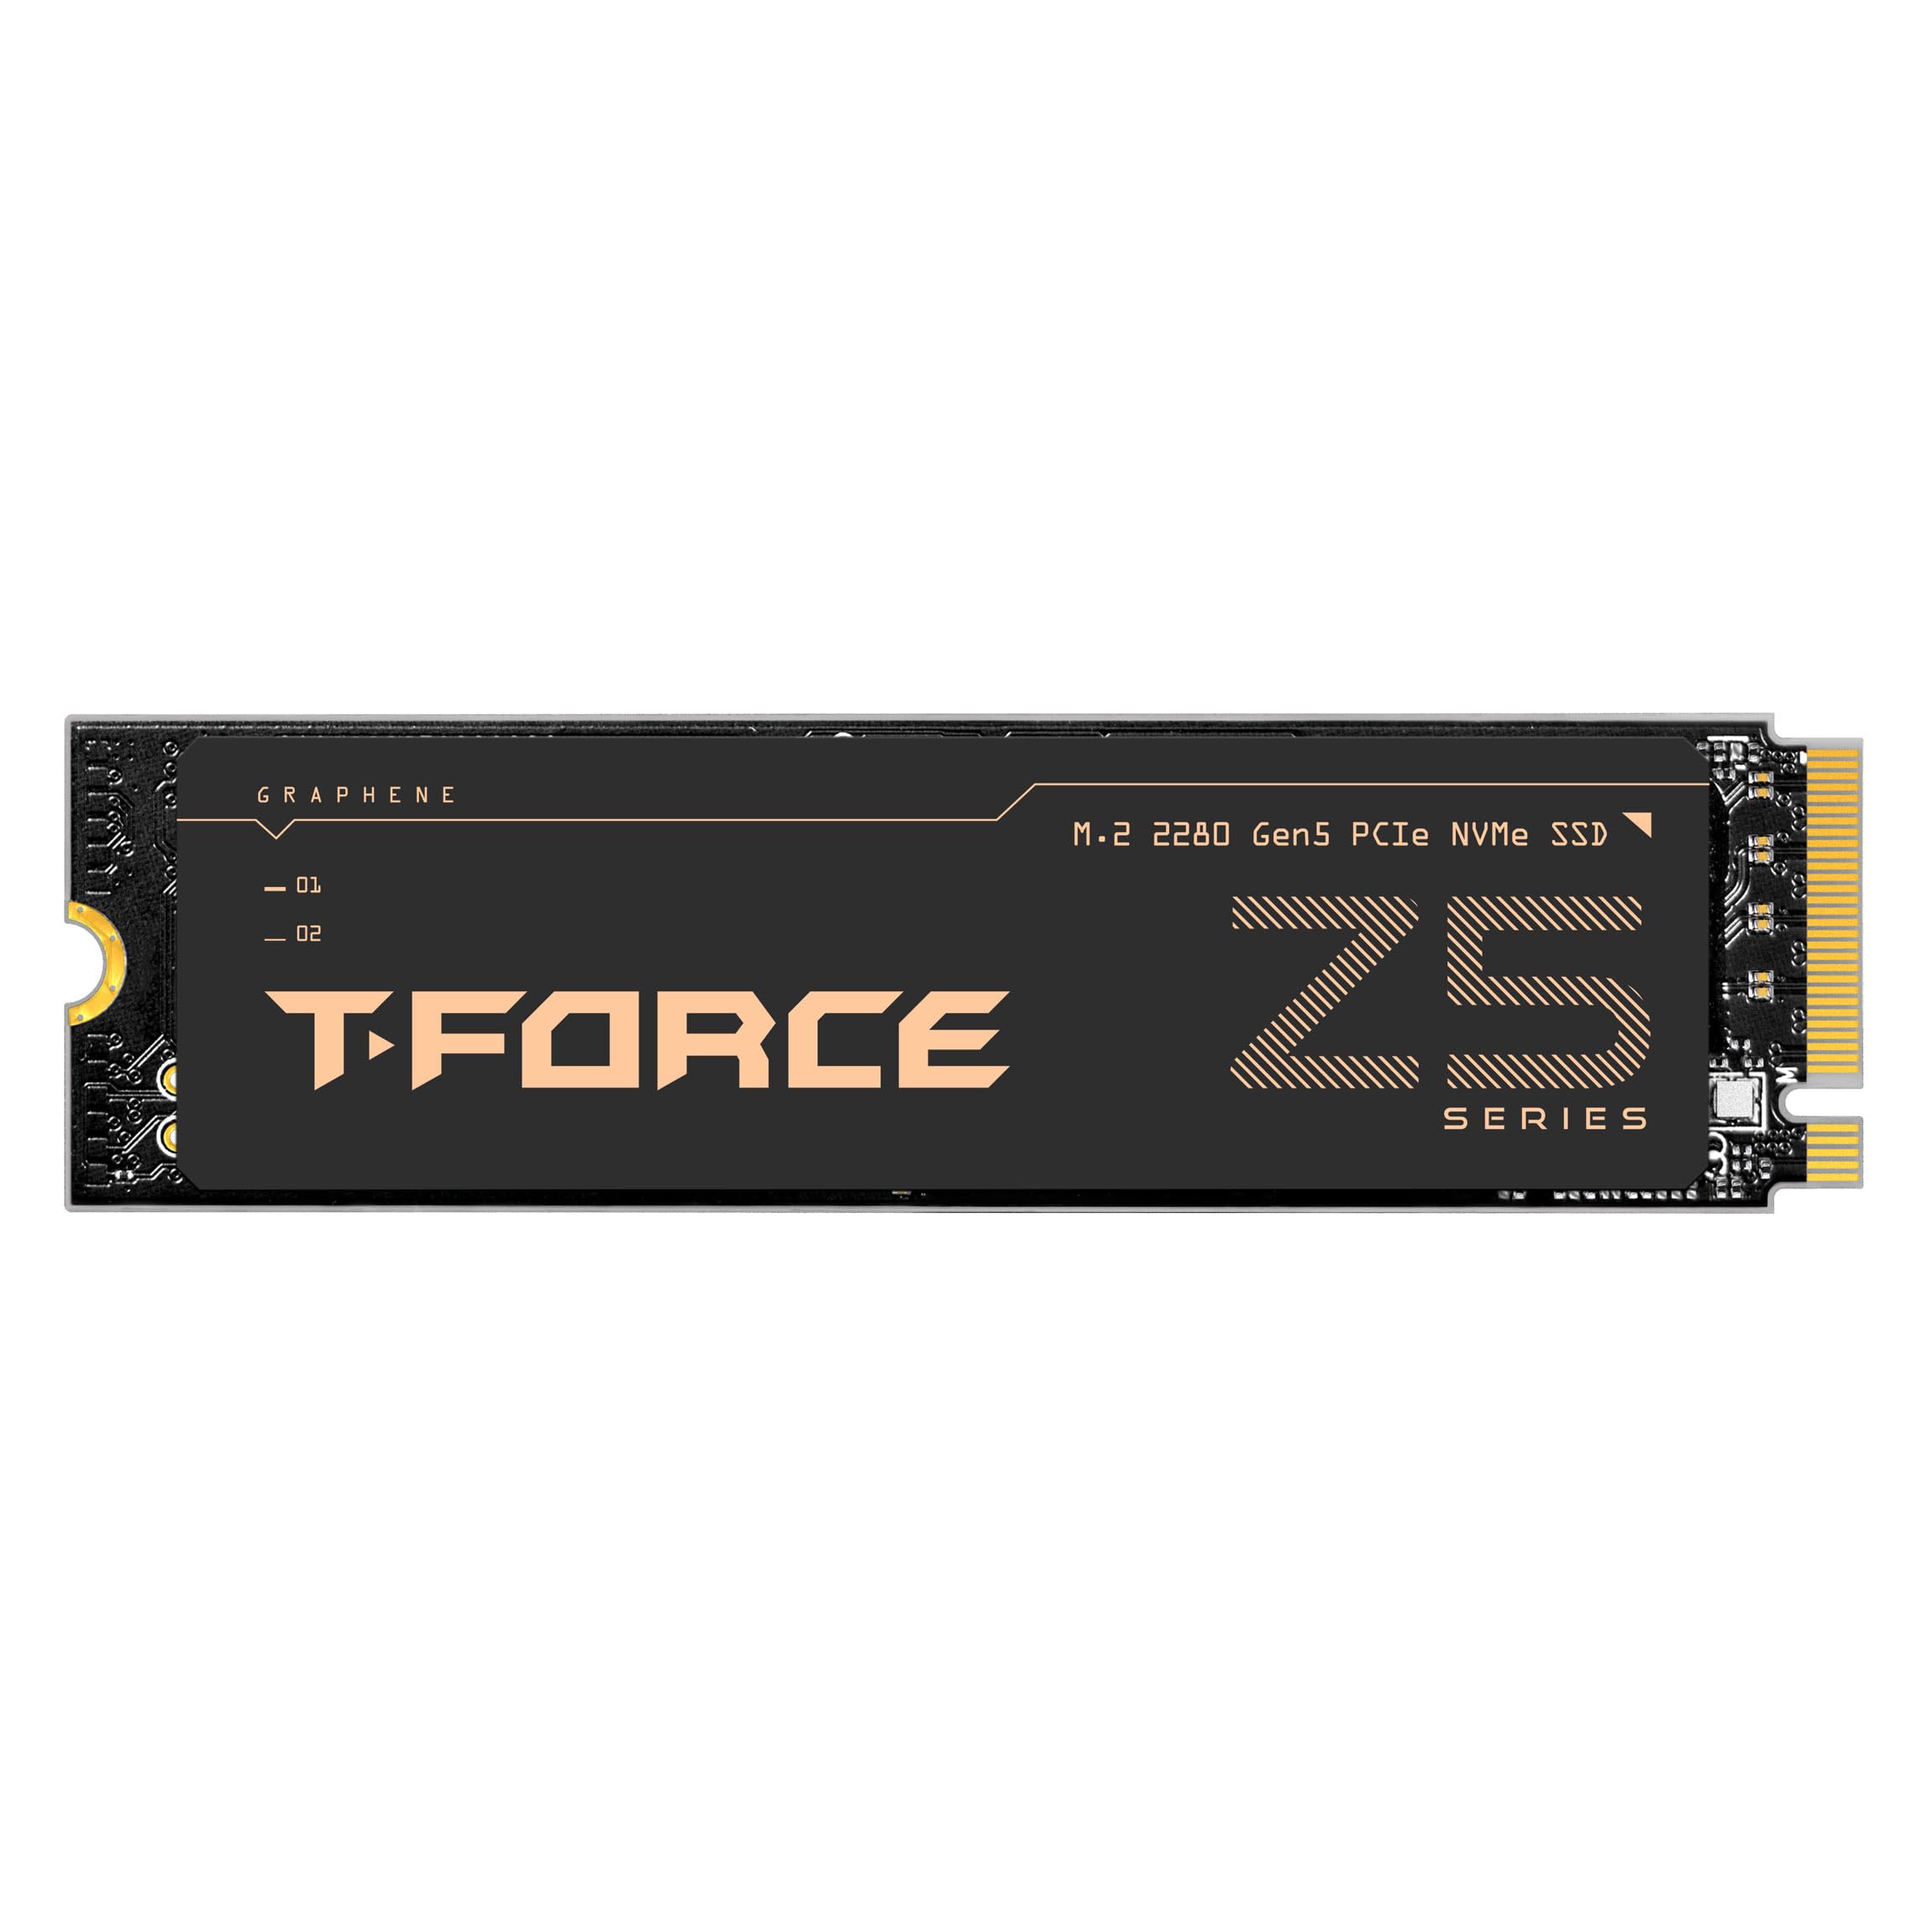 TEAMGROUP T-Force Z540 1TB DRAM SLC Cache 3D TLC NAND NVMe Phison E26 PCIe Gen5x4 M.2 2280 Gaming SSD with Ultra-Thin Graphene Heat Spreader Read/Write 11700/9500 MB/s TM - $100.49